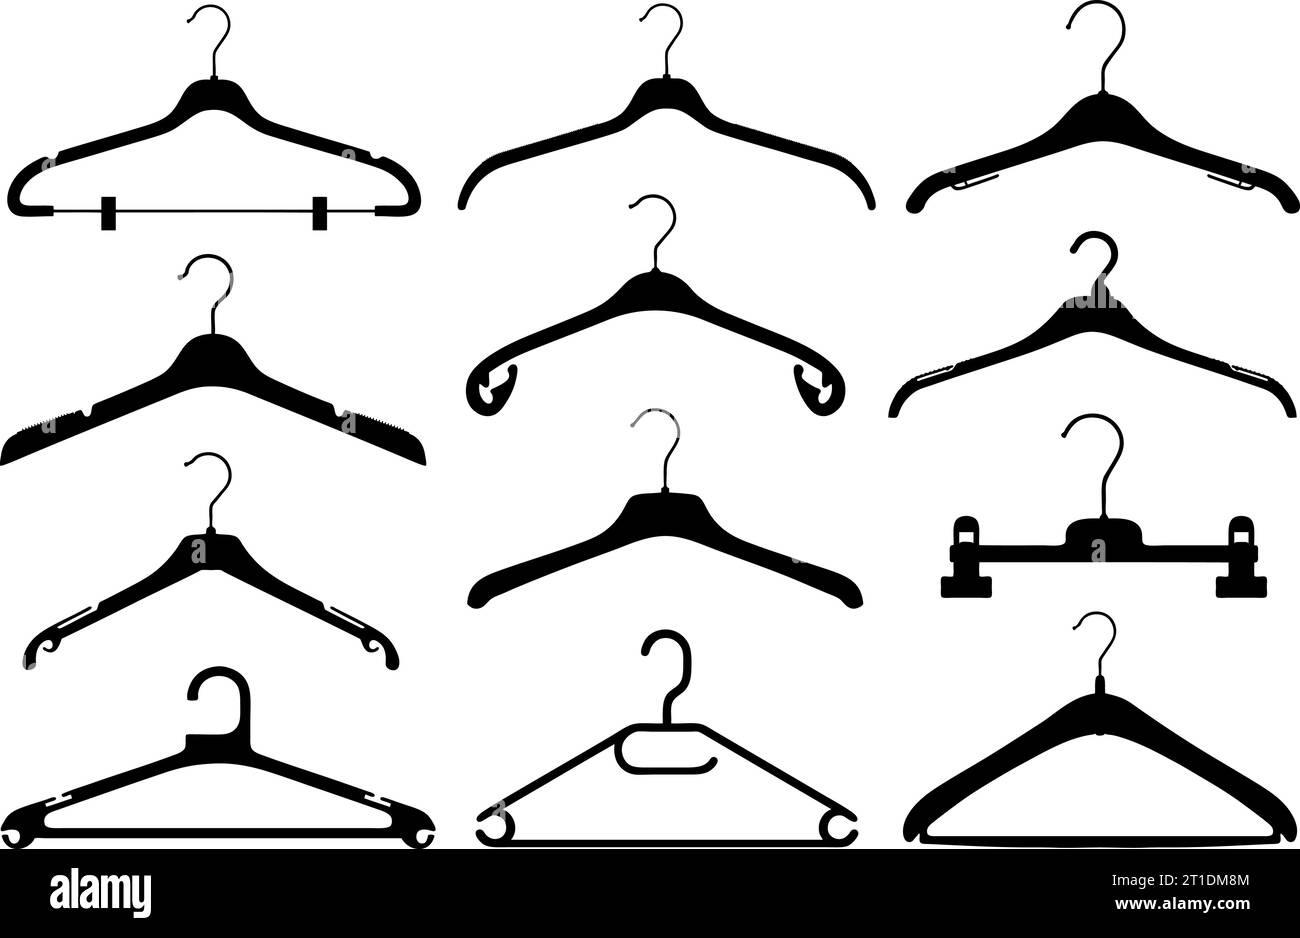 Illustration of different coat hangers isolated on white Stock Vector